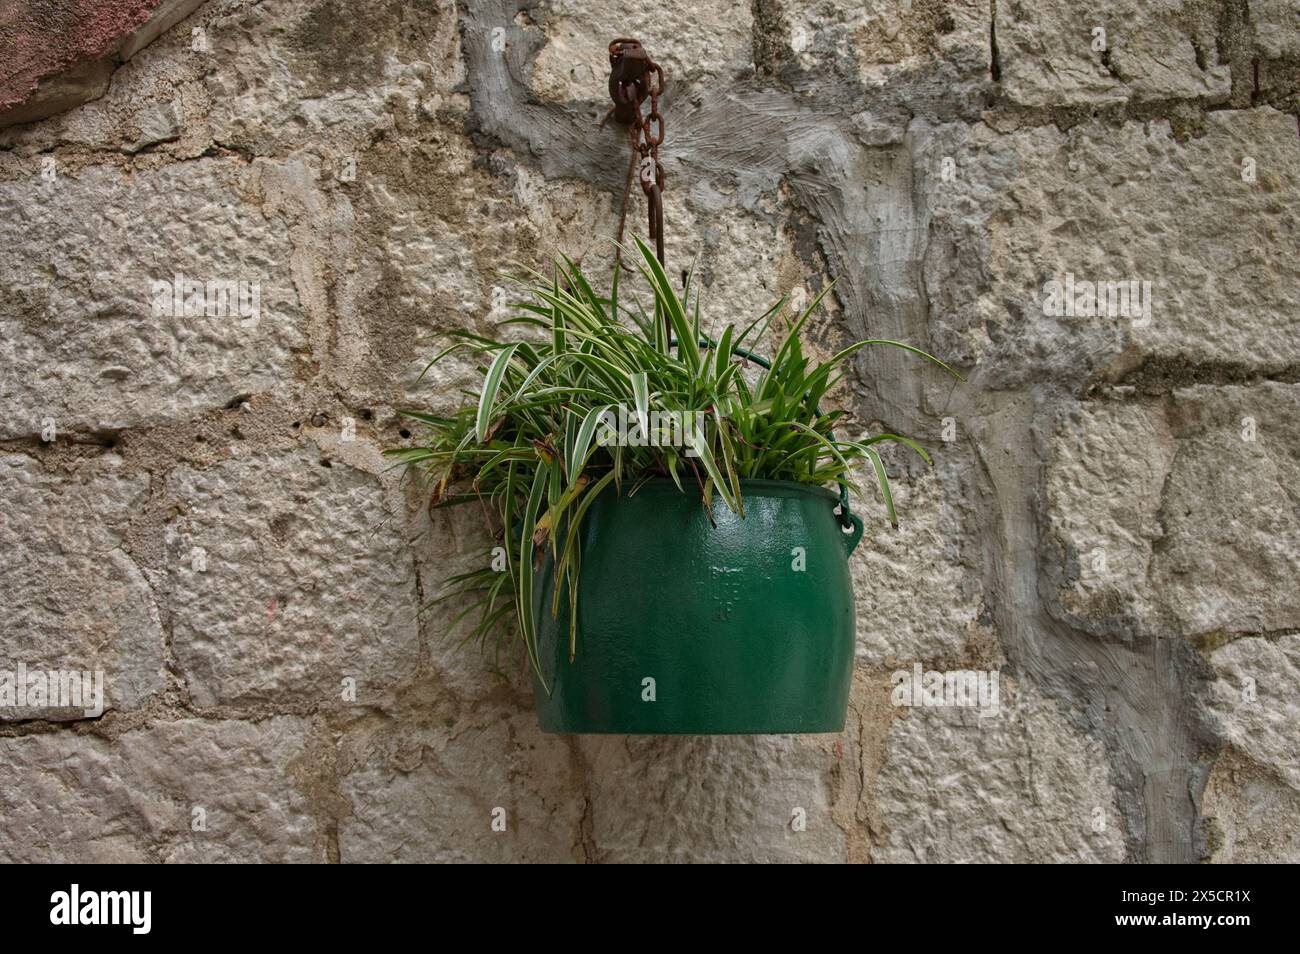 Potted plant hanging on a stone wall Stock Photo